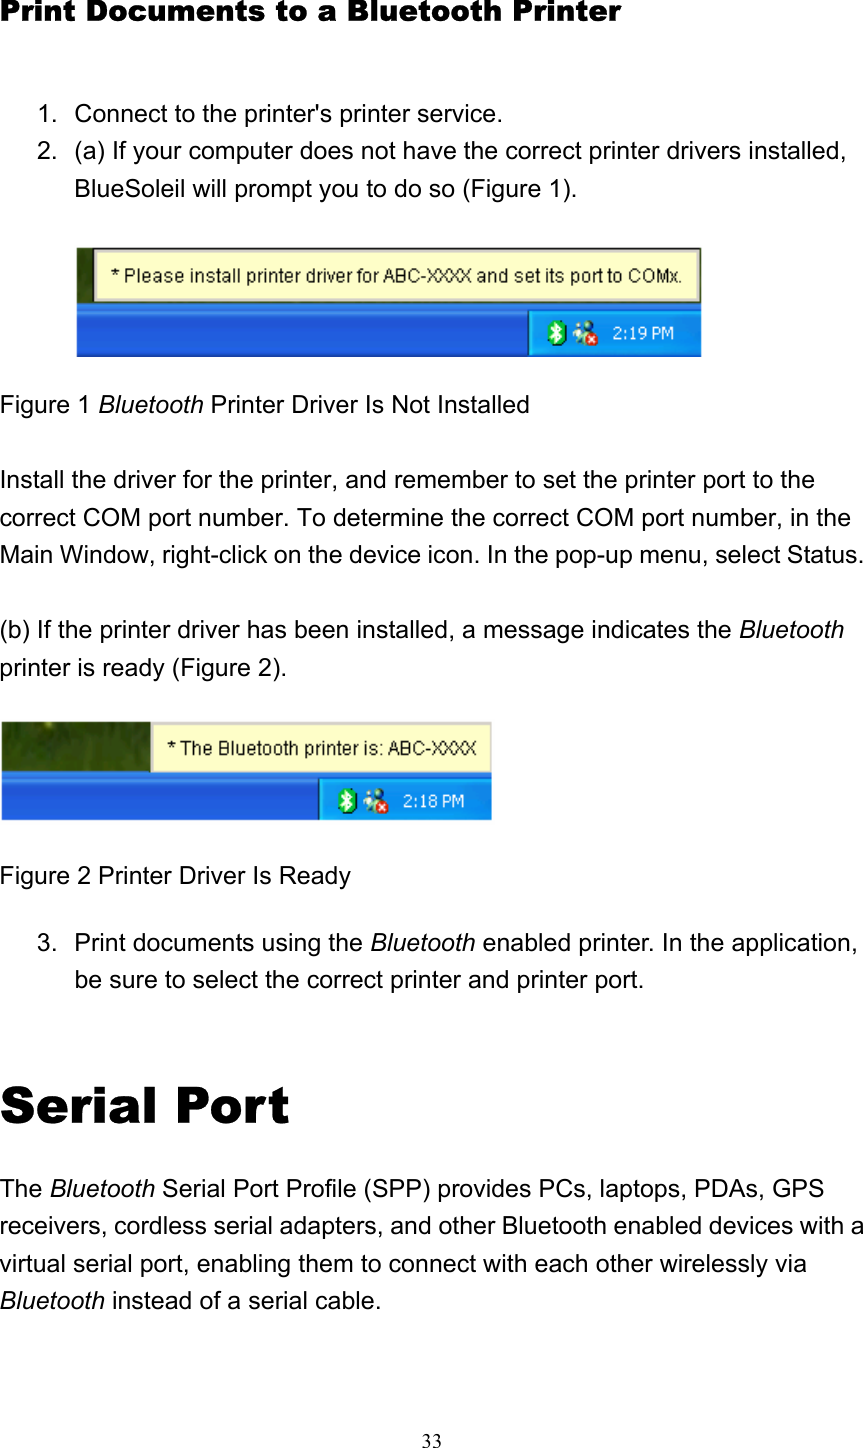   33Print Documents to a Bluetooth Printer 1.  Connect to the printer&apos;s printer service.   2.  (a) If your computer does not have the correct printer drivers installed, BlueSoleil will prompt you to do so (Figure 1).   Figure 1 Bluetooth Printer Driver Is Not Installed  Install the driver for the printer, and remember to set the printer port to the correct COM port number. To determine the correct COM port number, in the Main Window, right-click on the device icon. In the pop-up menu, select Status.  (b) If the printer driver has been installed, a message indicates the Bluetooth printer is ready (Figure 2).    Figure 2 Printer Driver Is Ready 3.  Print documents using the Bluetooth enabled printer. In the application, be sure to select the correct printer and printer port.     Serial Port The Bluetooth Serial Port Profile (SPP) provides PCs, laptops, PDAs, GPS receivers, cordless serial adapters, and other Bluetooth enabled devices with a virtual serial port, enabling them to connect with each other wirelessly via Bluetooth instead of a serial cable. 